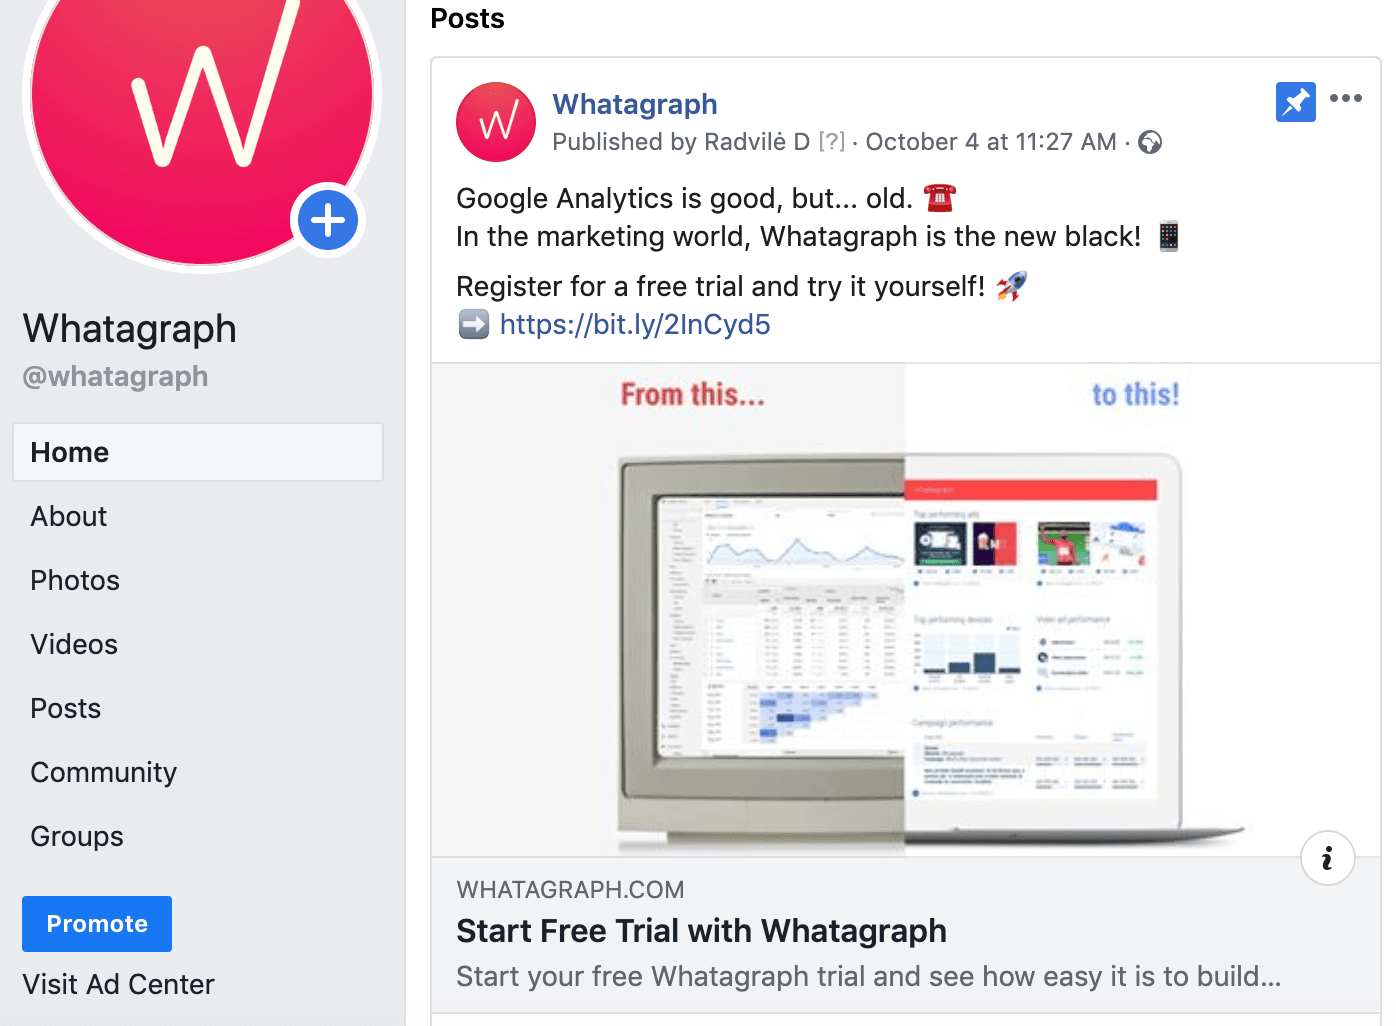 Facebbok post from Whatagraph Facebook page